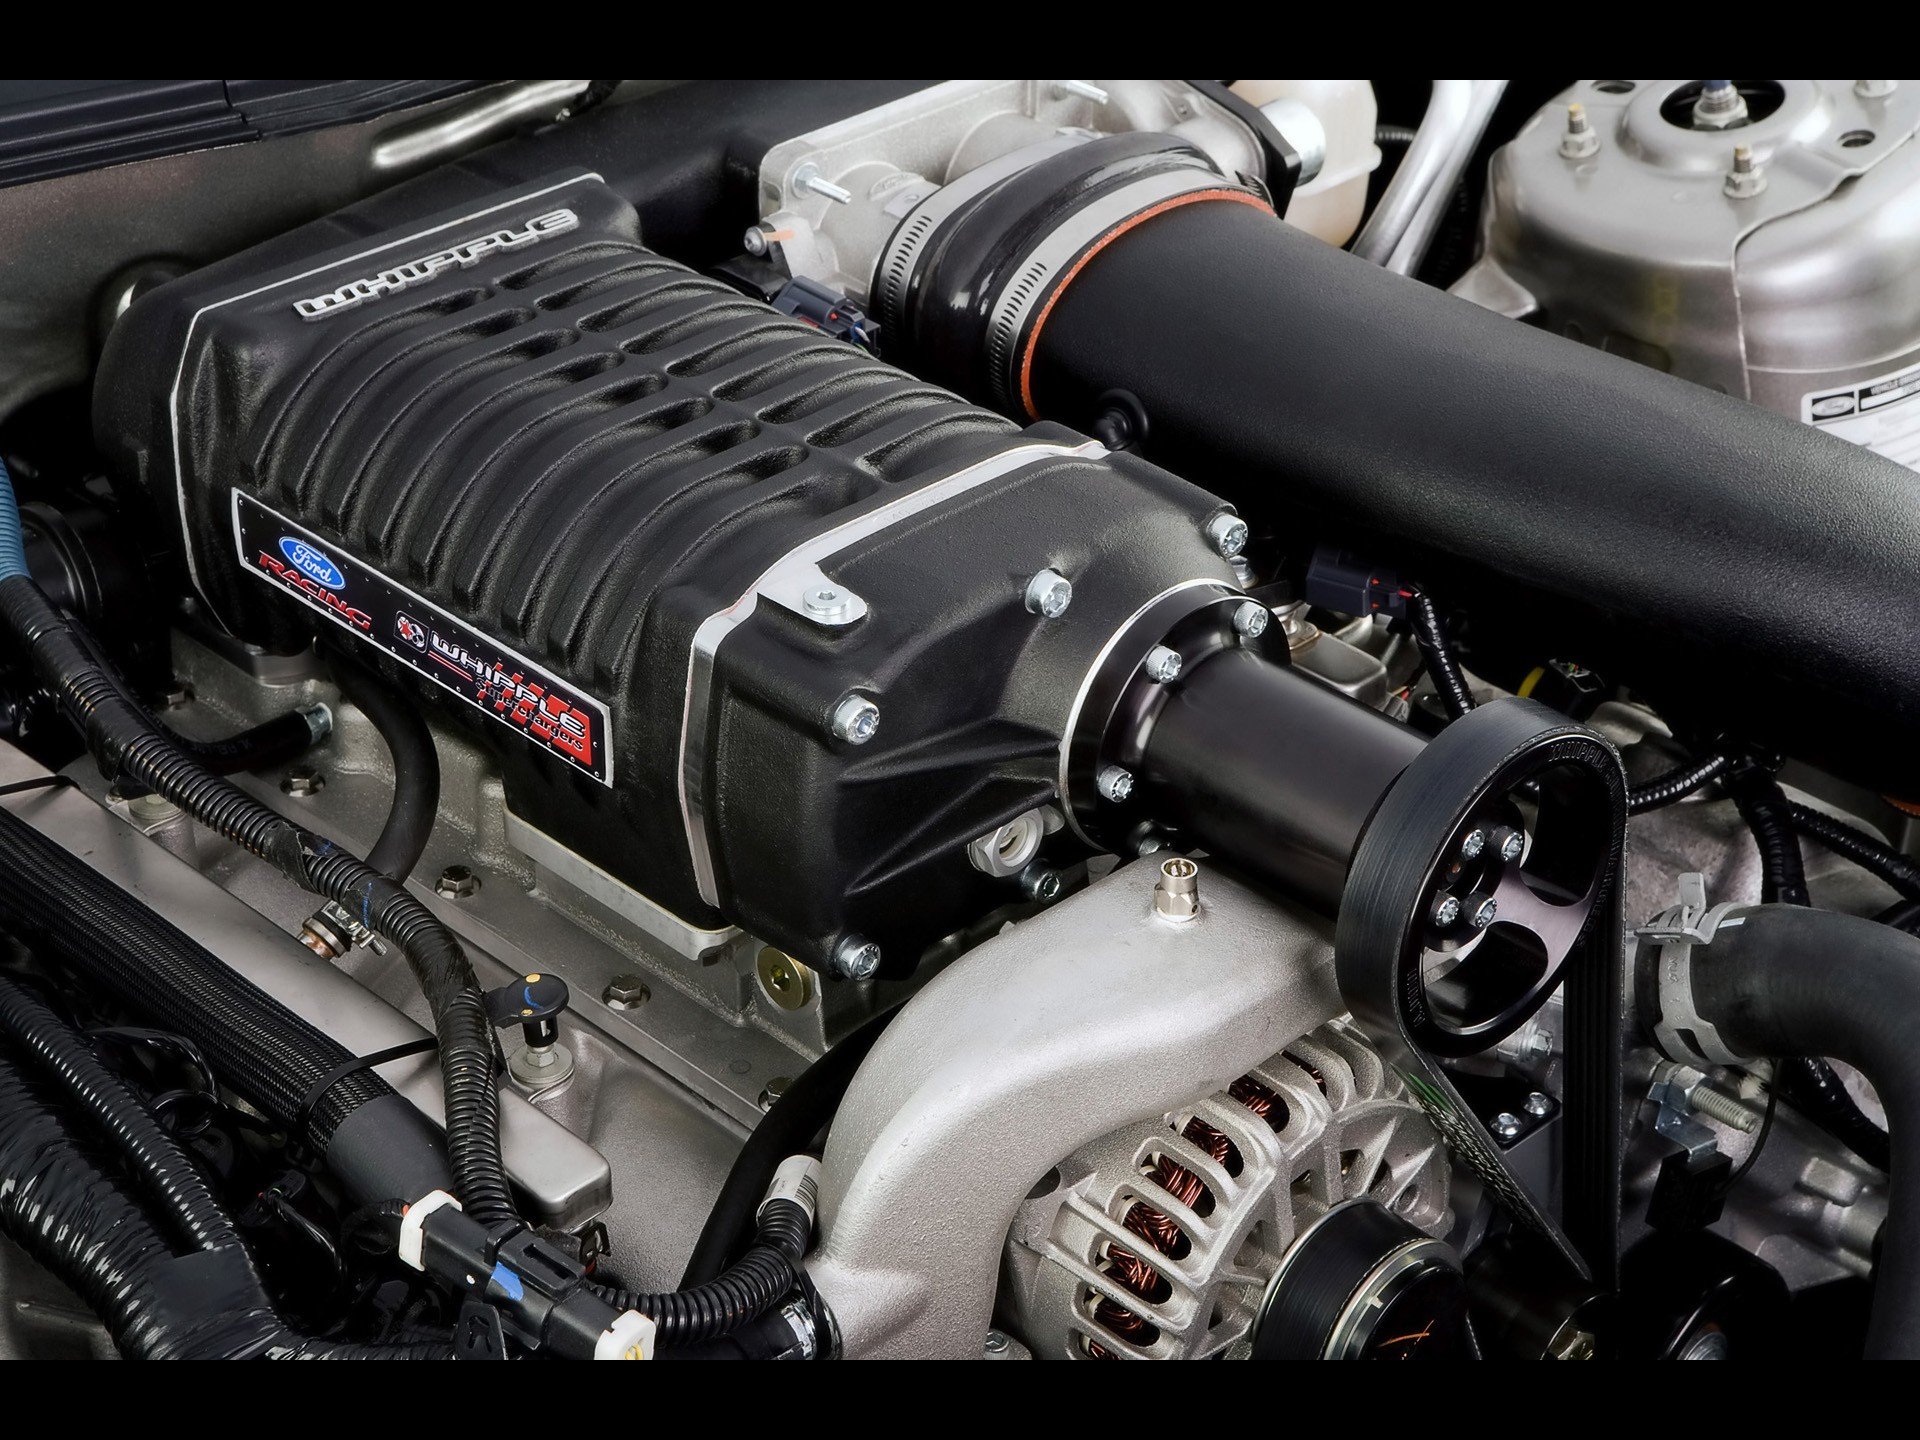 engines, Muscle, Cars, Vehicles, Ford, Mustang, Supercharged, V8, Engine, Supercharger Wallpaper